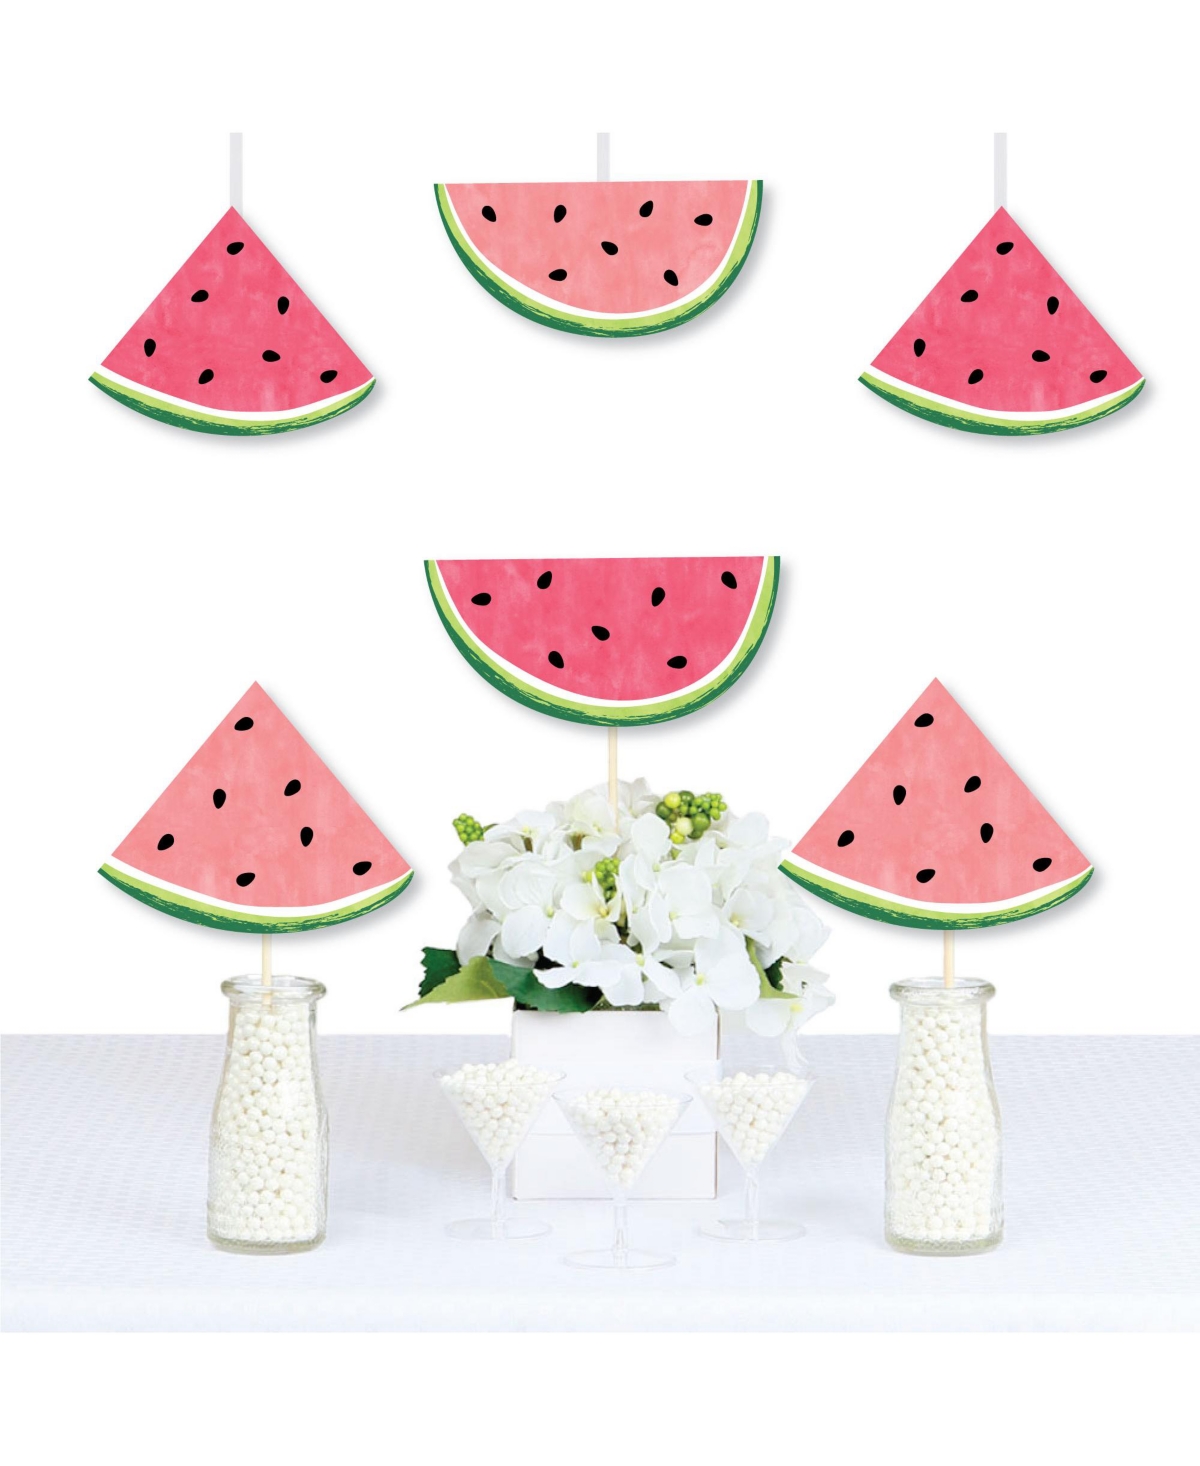 Sweet Watermelon - Decorations Diy Fruit Party Essentials - Set of 20